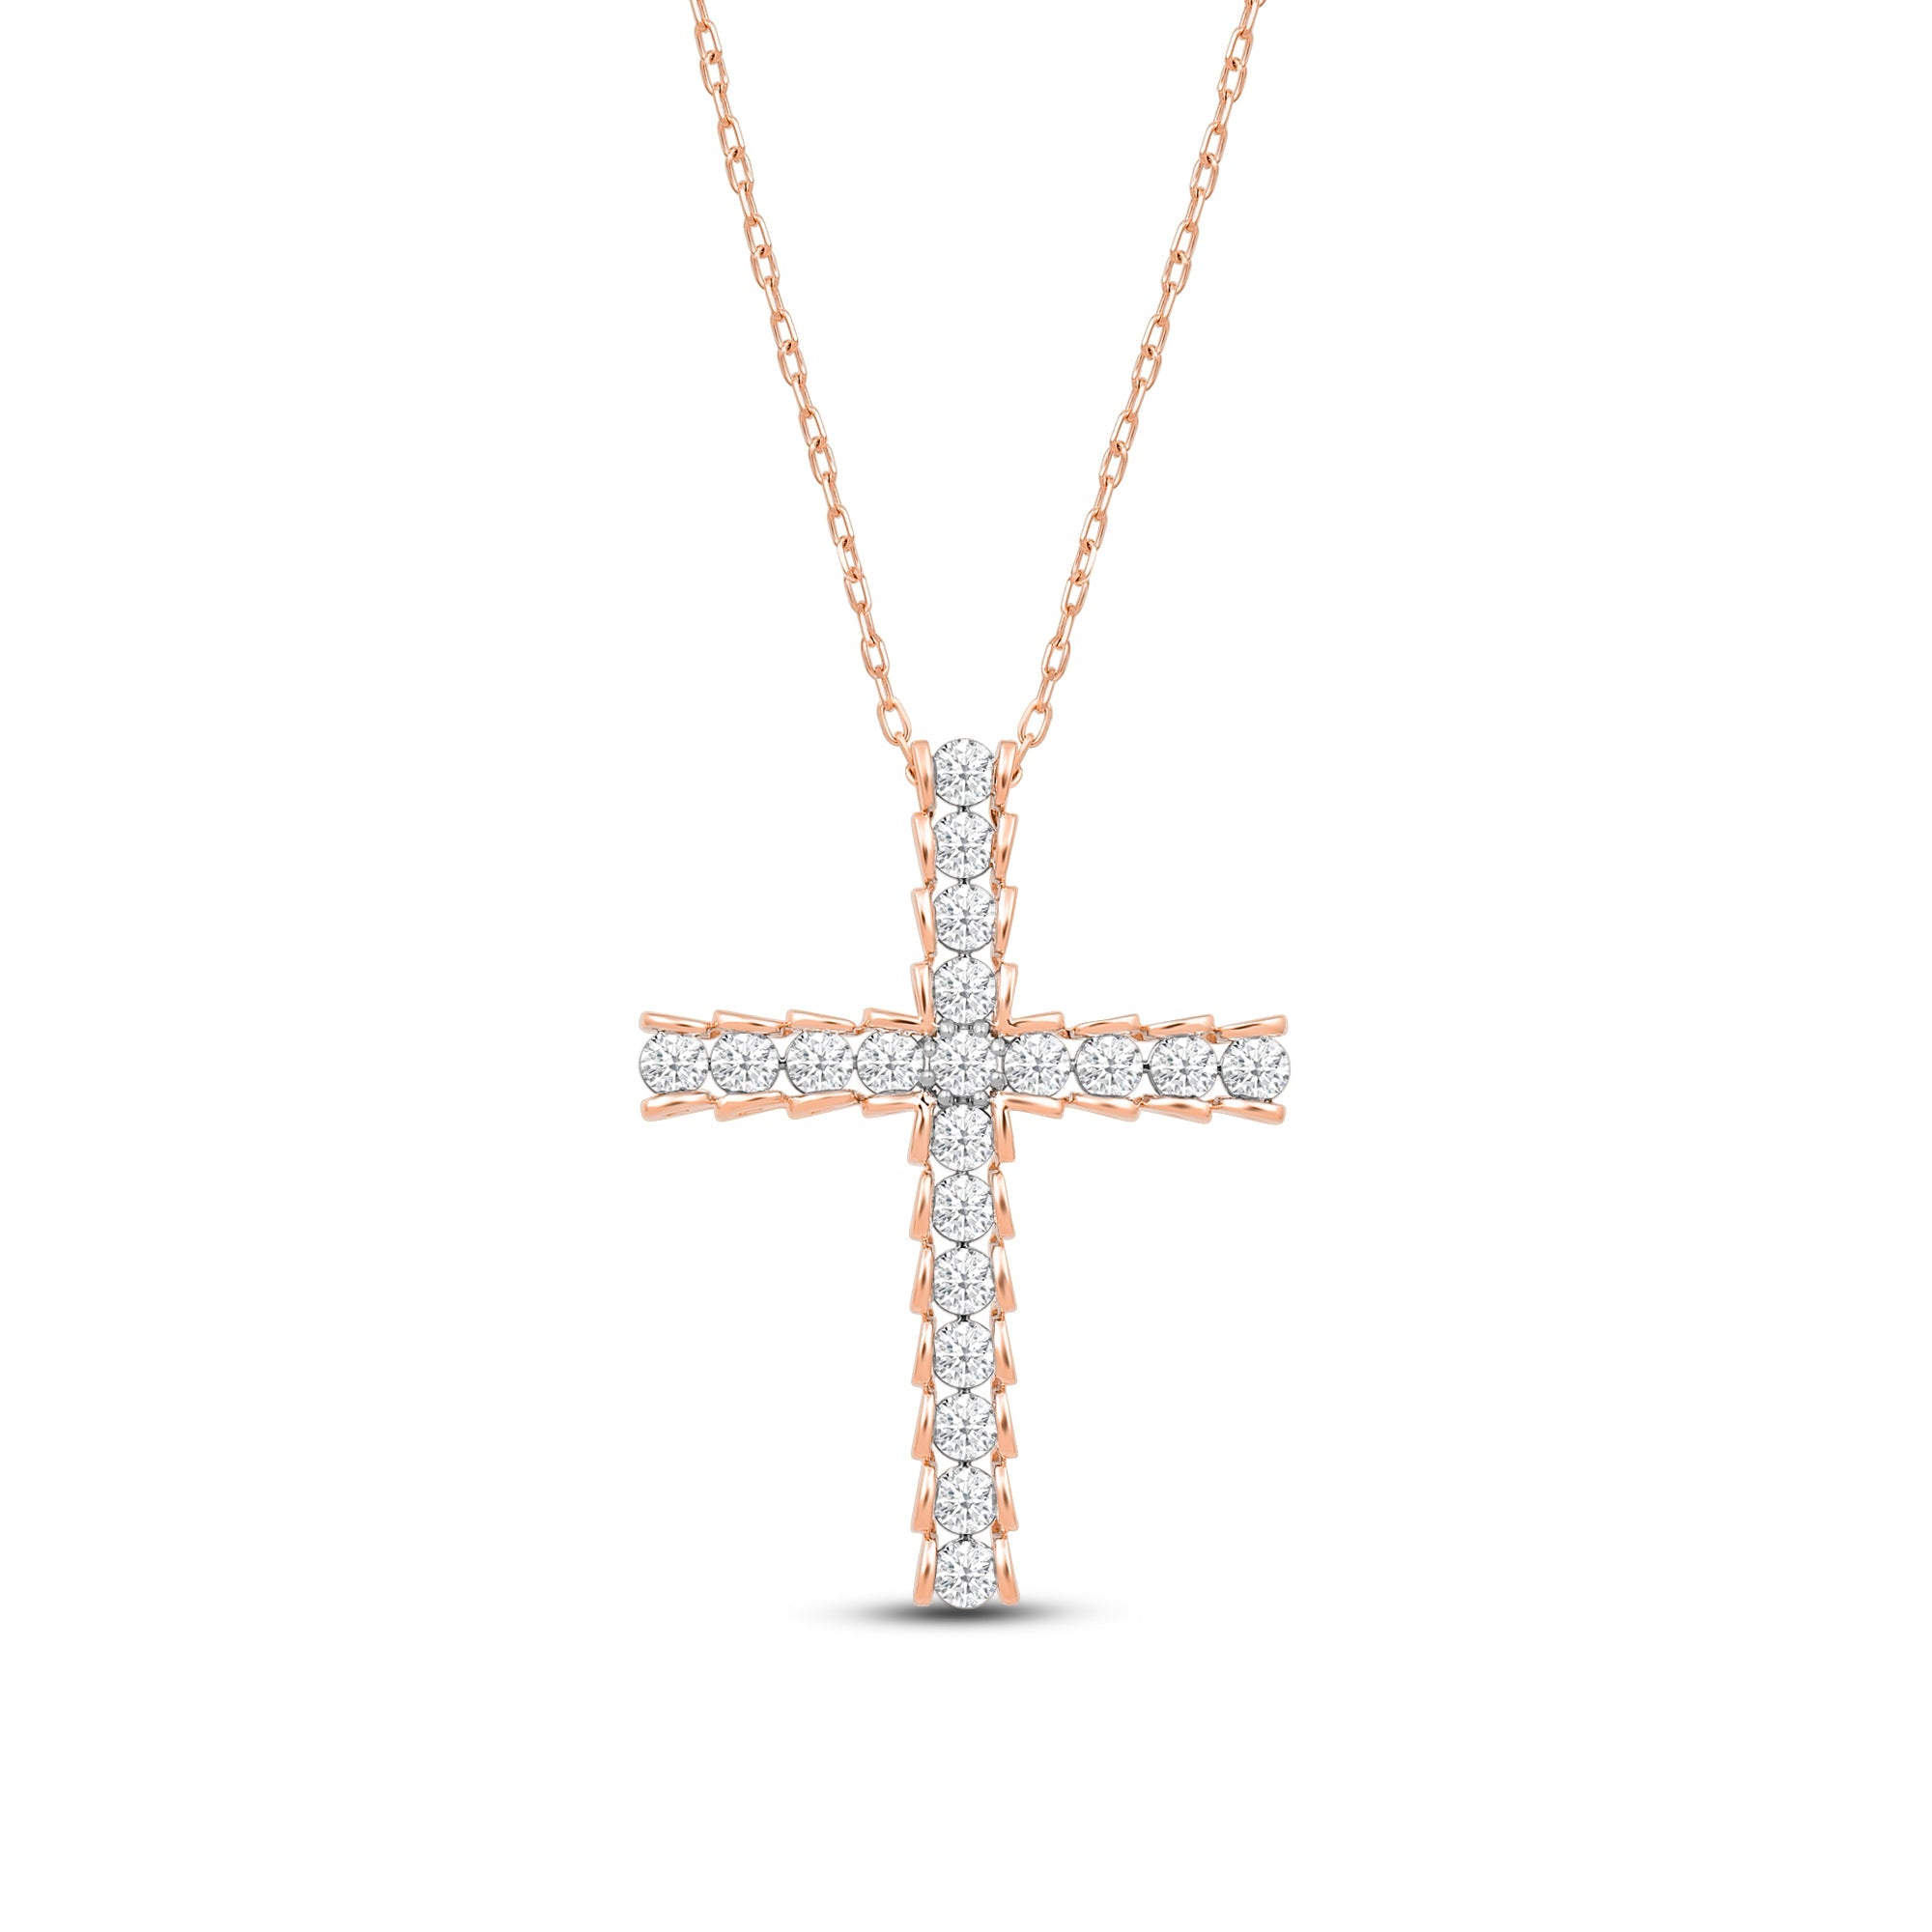 D&Z New Big Cross Pendant With 13mm Bling Rhinestones Miami Cuban Chain  HipHop Iced Out Bling Necklaces Fashion Jewelry For Man on OnBuy